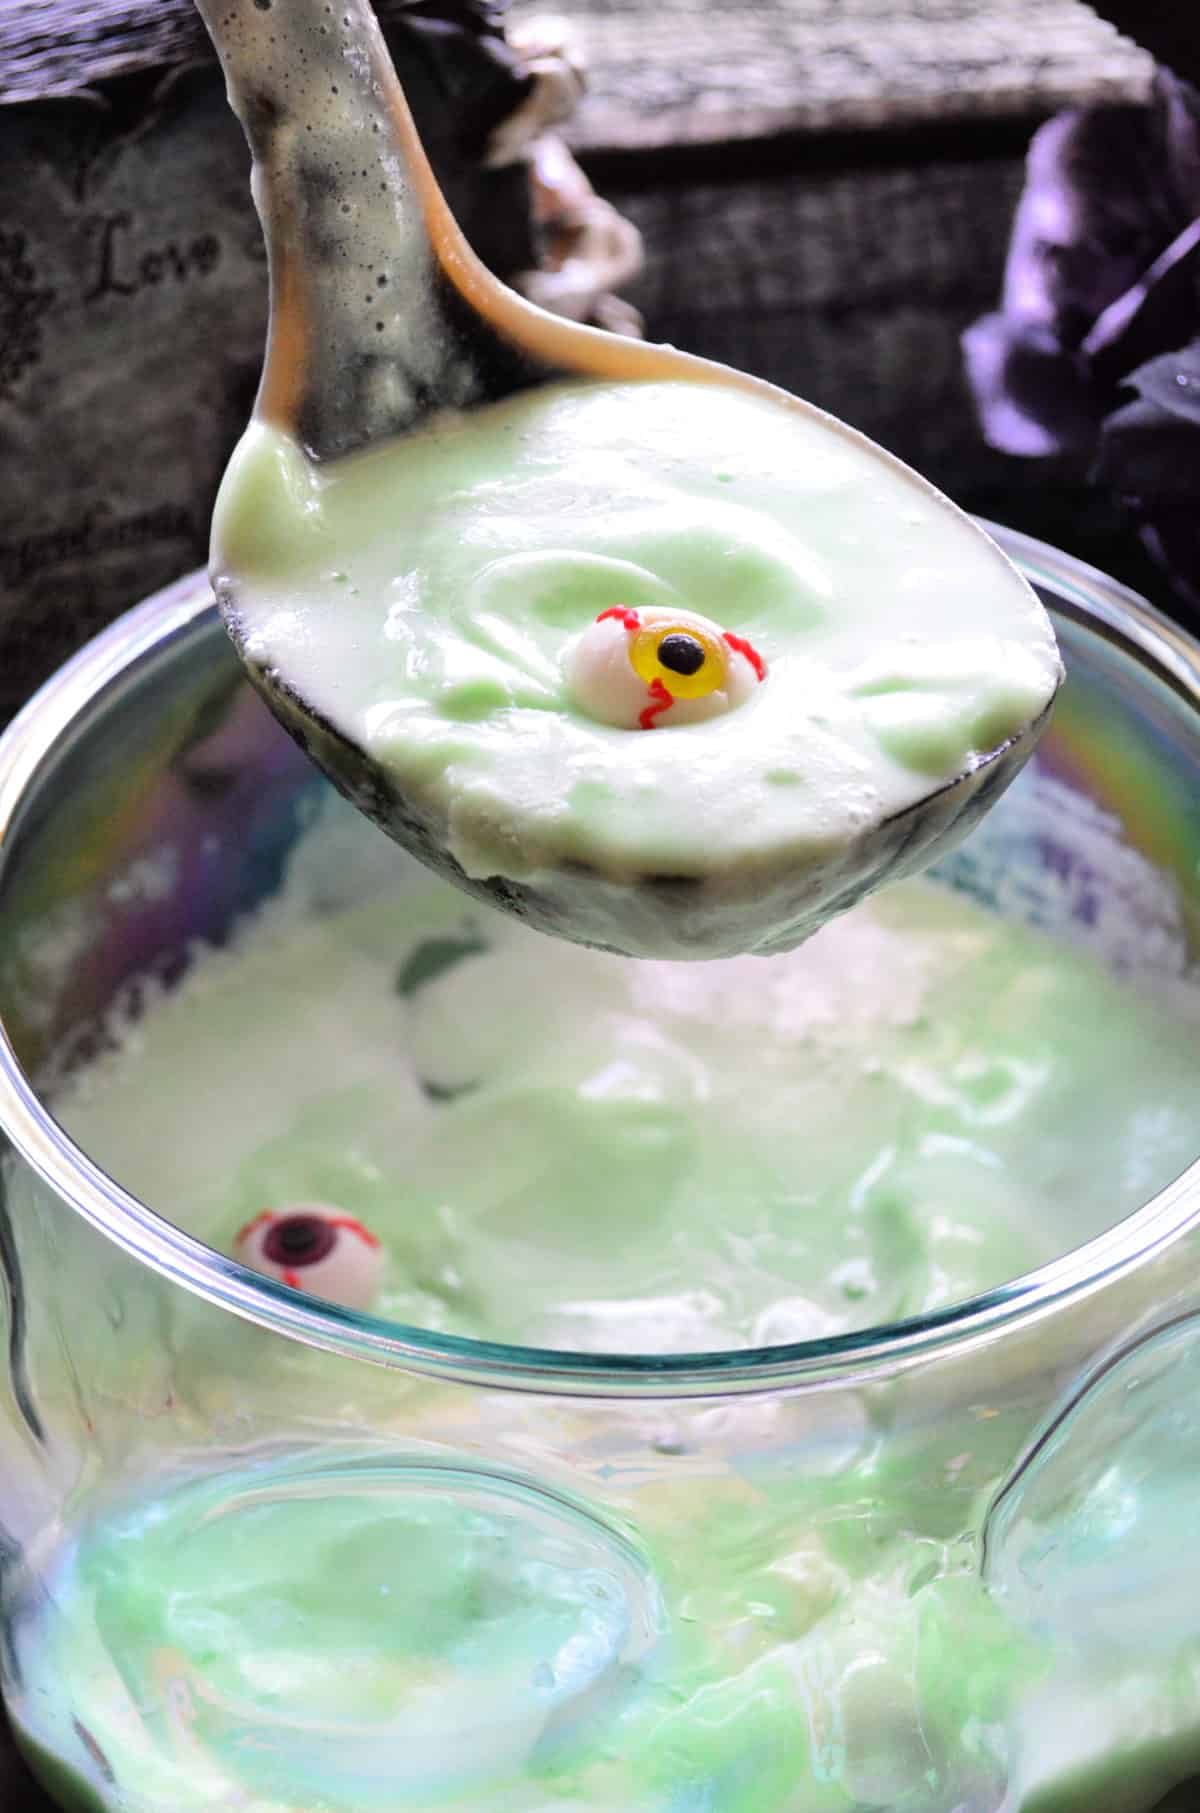 Ladle with creamy green liquid and candy eyeball over punch bowl of creamy green drink.